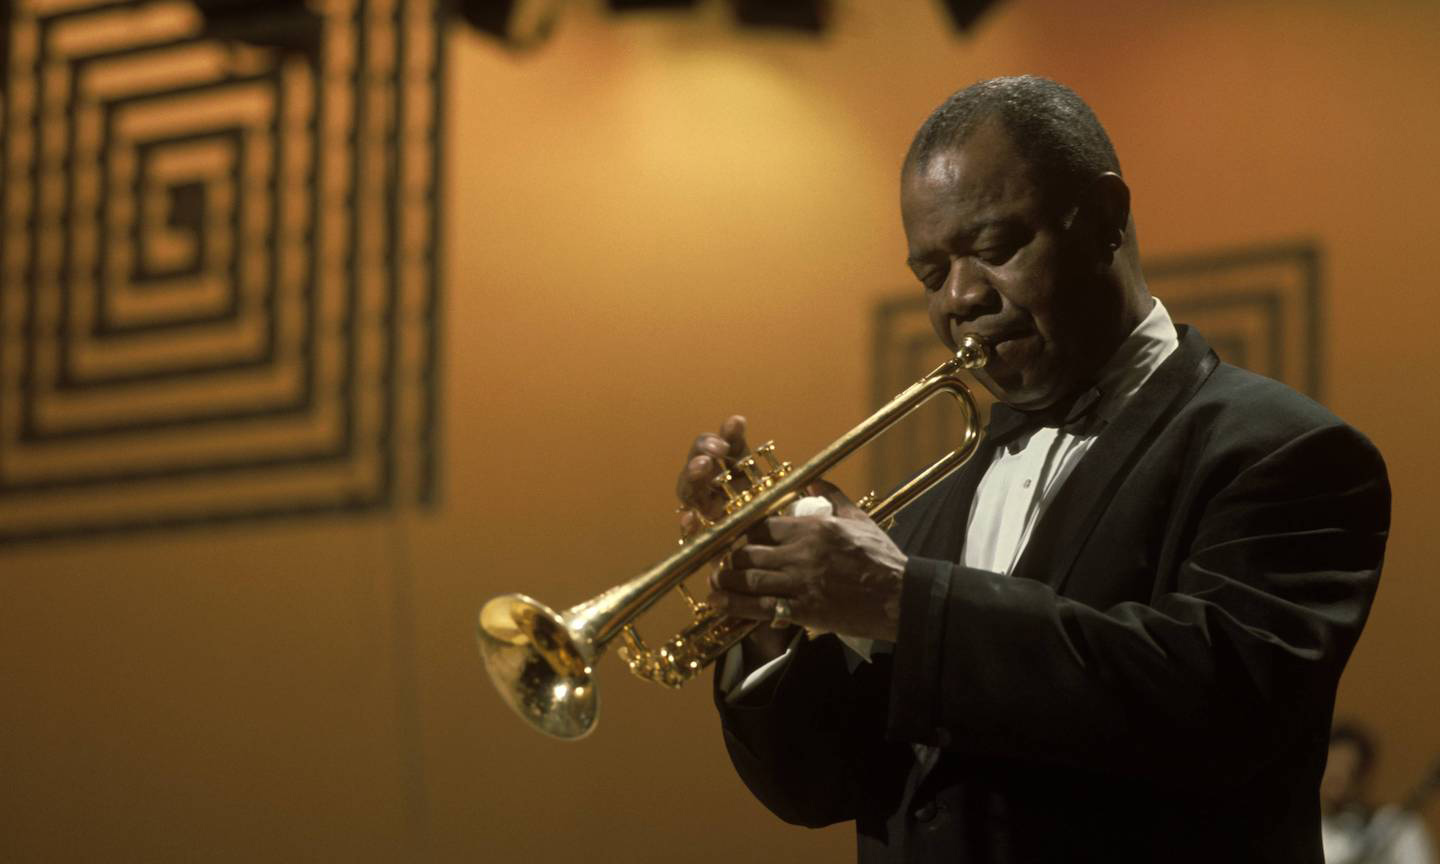 New doc 'Louis Armstrong's Black & Blues' confronts the artist's